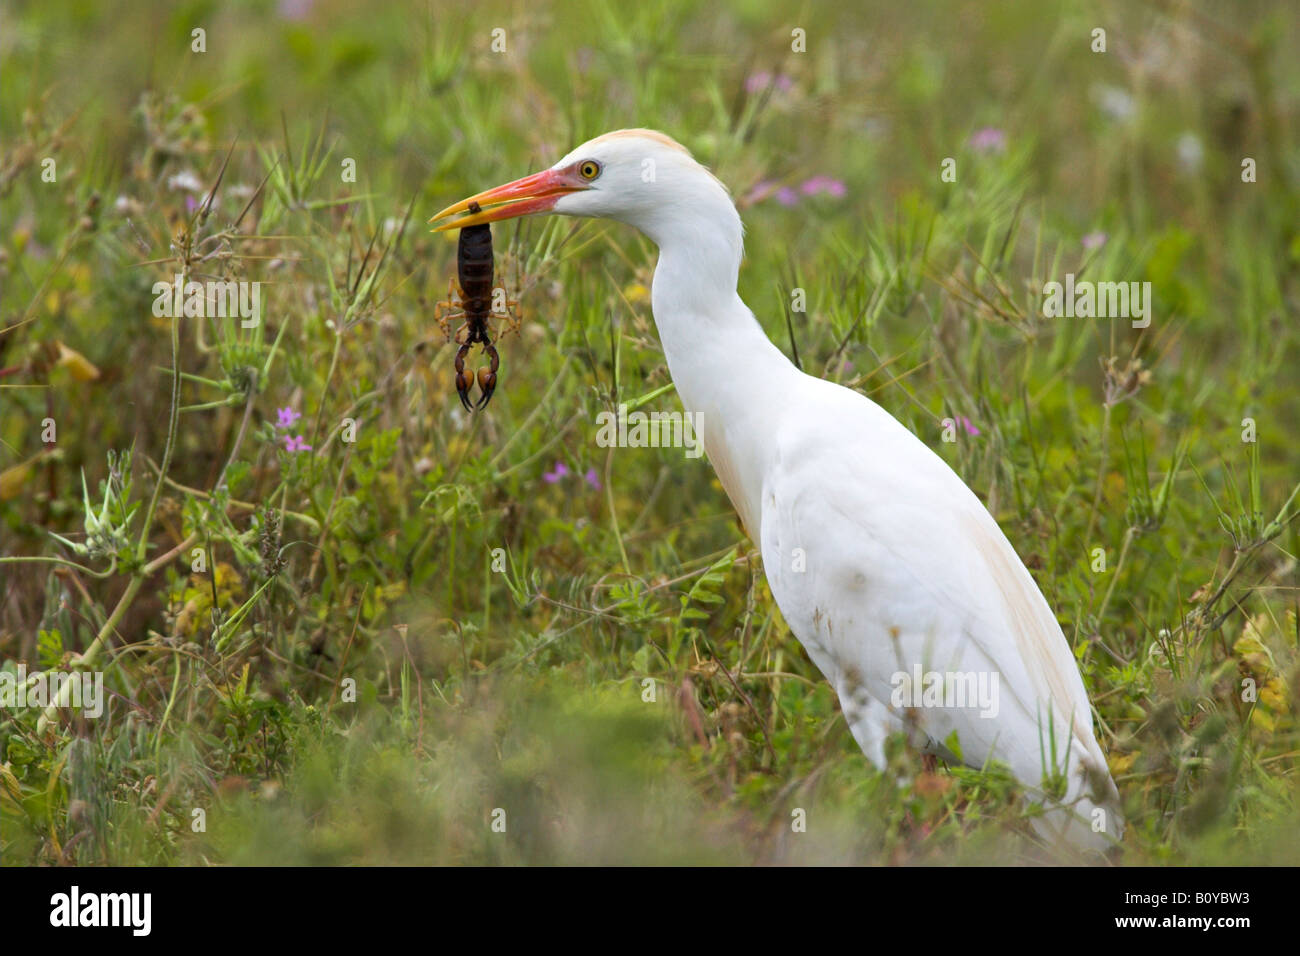 cattle egret, buff-backed heron (Ardeola ibis, Bubulcus ibis), eating a scorpion, South Africa, Cape Province Stock Photo